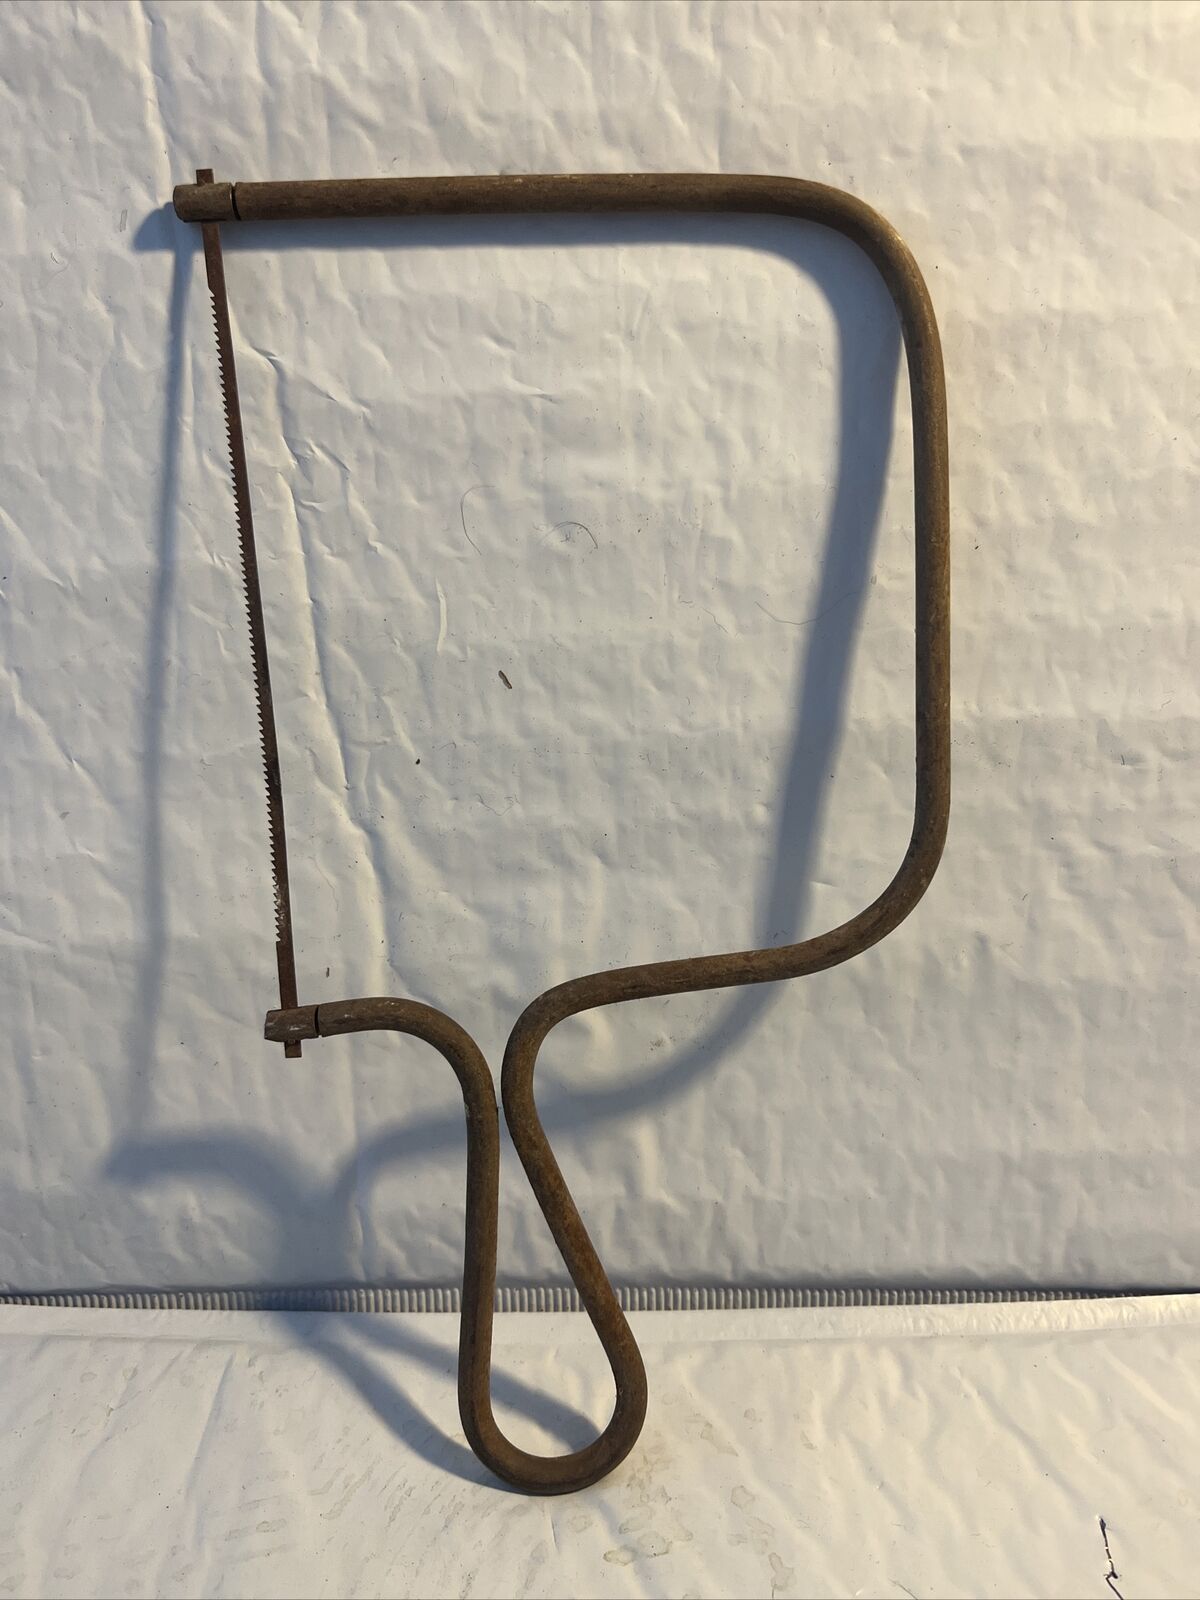 Vintage Coping Saw